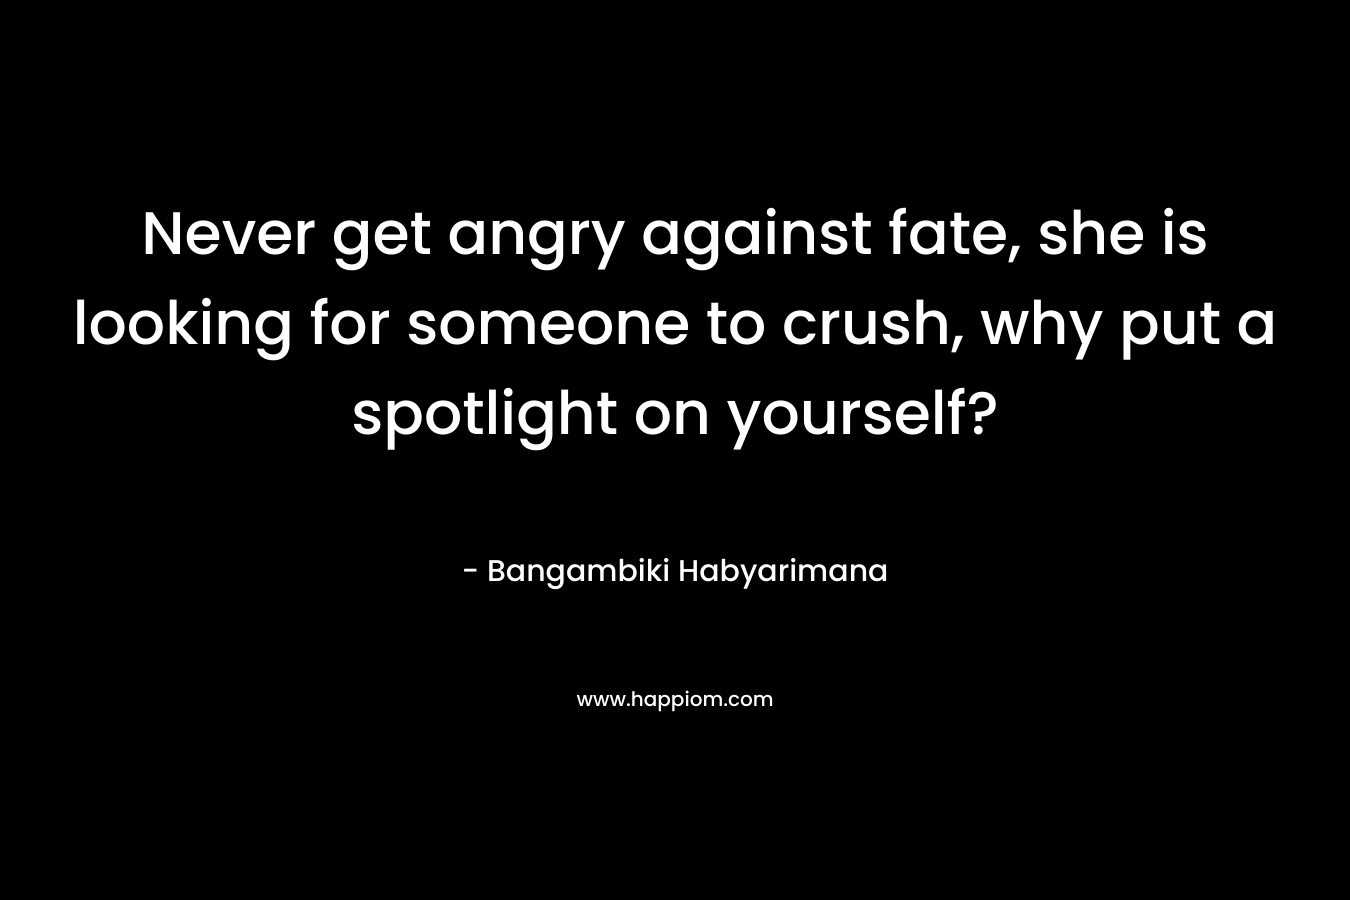 Never get angry against fate, she is looking for someone to crush, why put a spotlight on yourself? – Bangambiki Habyarimana